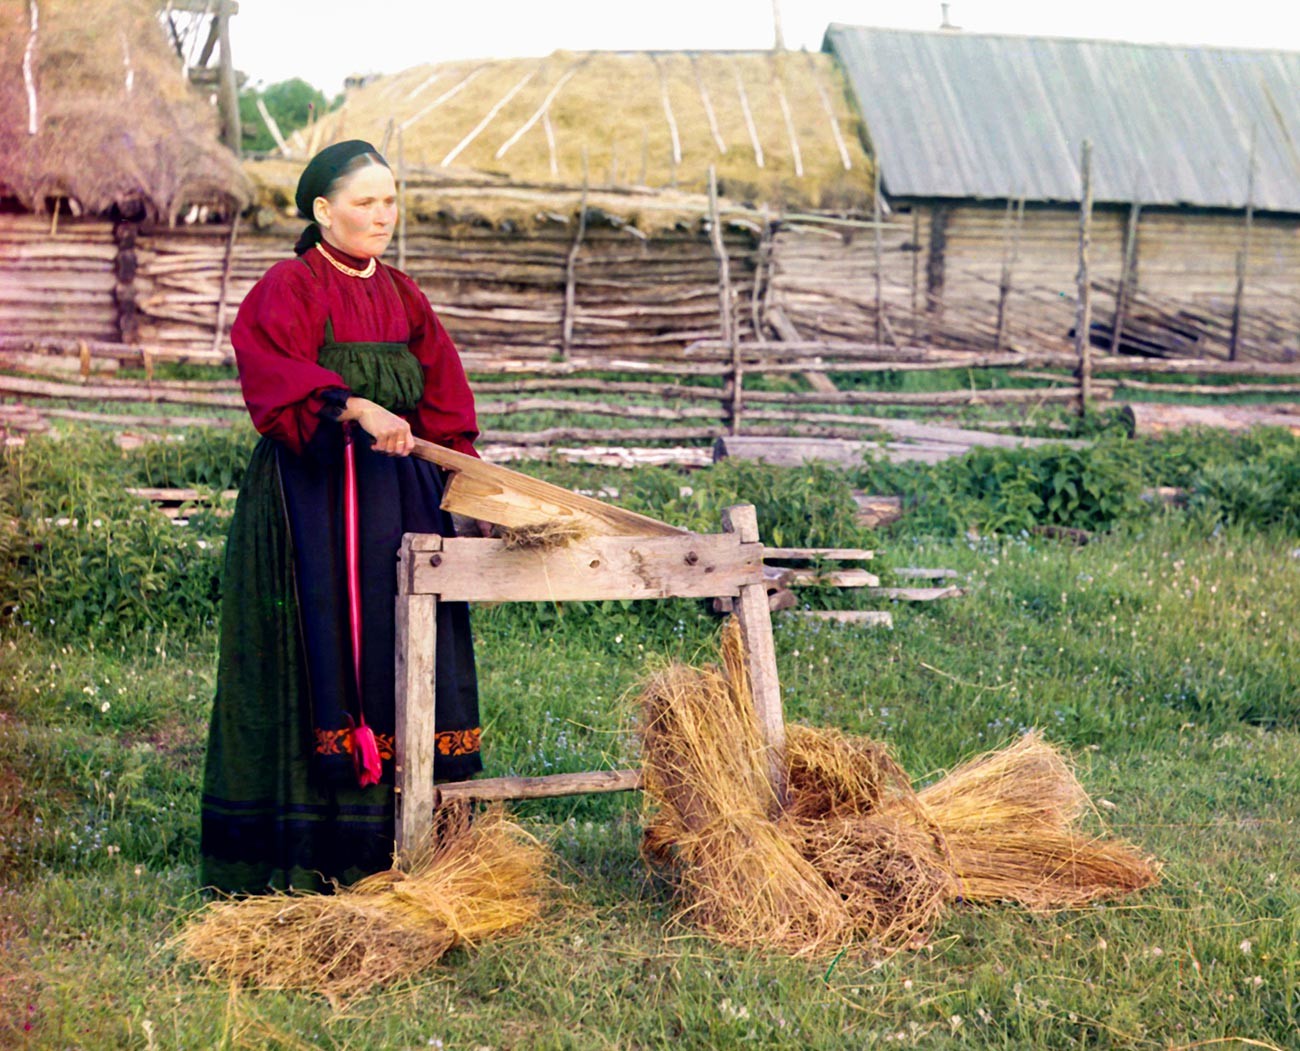 A peasant woman beating linen, early 20th century